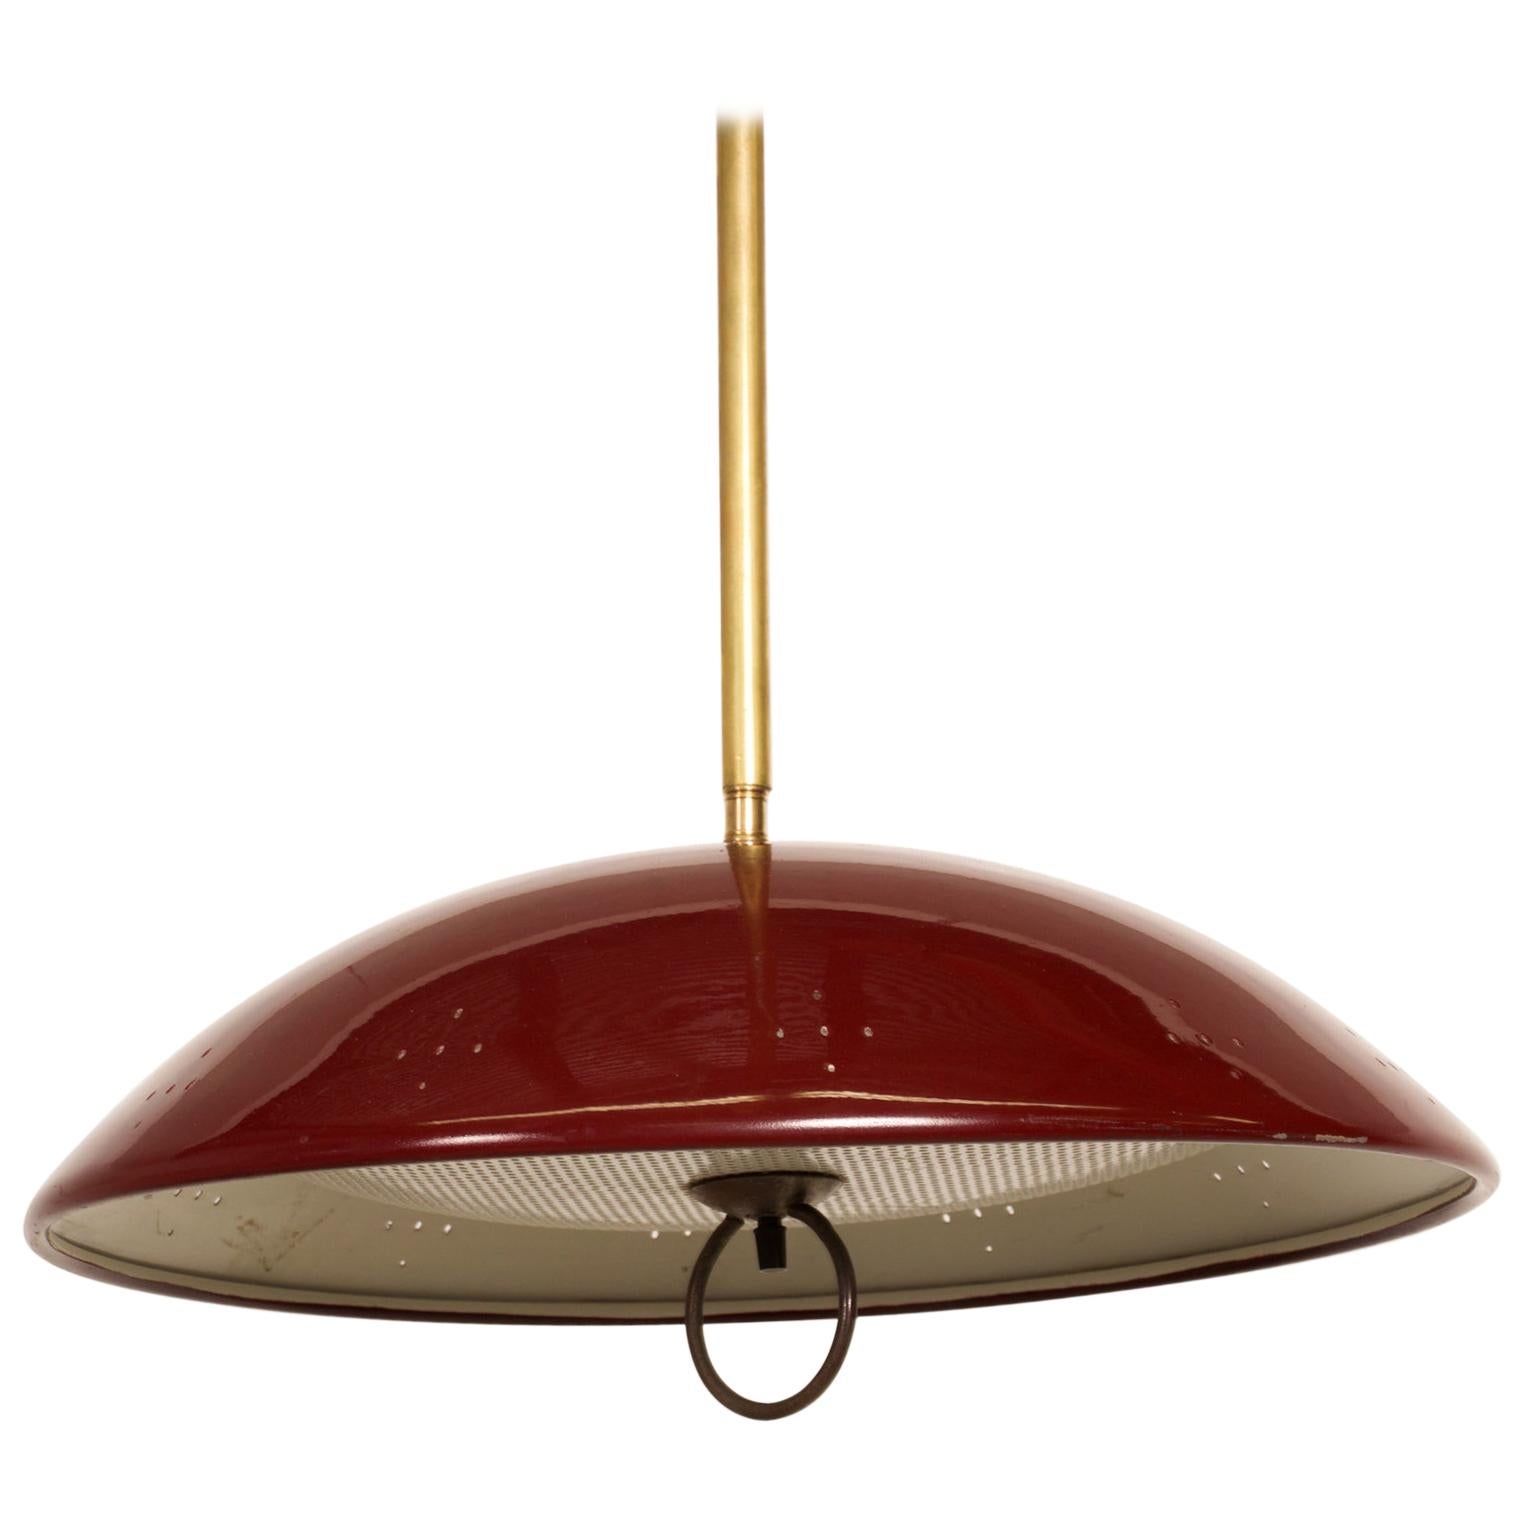 AMBIANIC offers: 
1960s Atomic Modern Pendant Light Hanging Red Saucer Dish Perforated after Lightolier made USA
No label. Rewired.  No canopy. Original preowned vintage Item unrestored condition. Selling as is condition.
Dimensions: 13.75 in